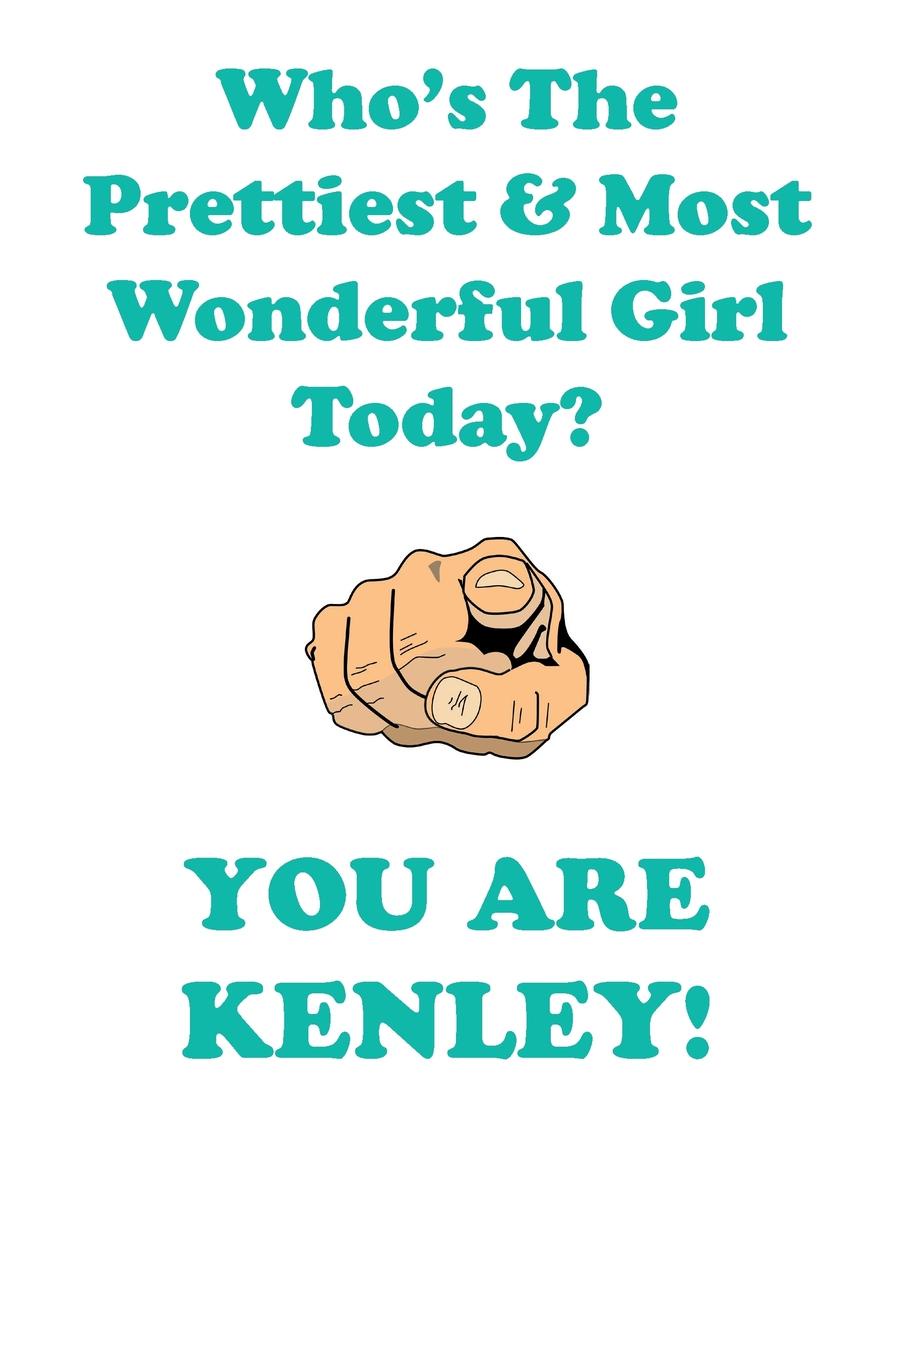 KENLEY is The Prettiest Affirmations Workbook Positive Affirmations Workbook Includes. Mentoring Questions, Guidance, Supporting You